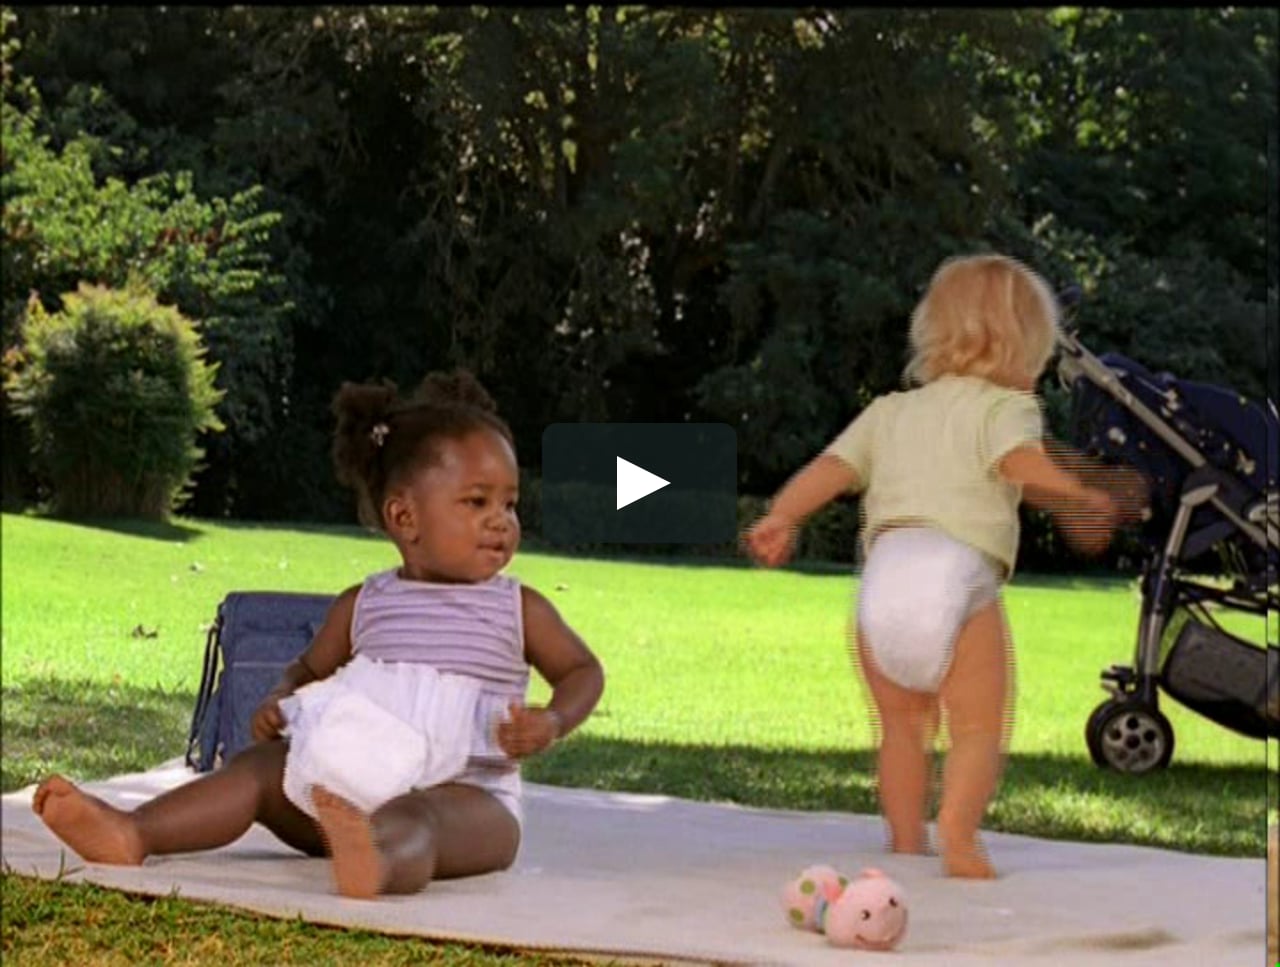 Huggies Commercial (Voice Over) on Vimeo